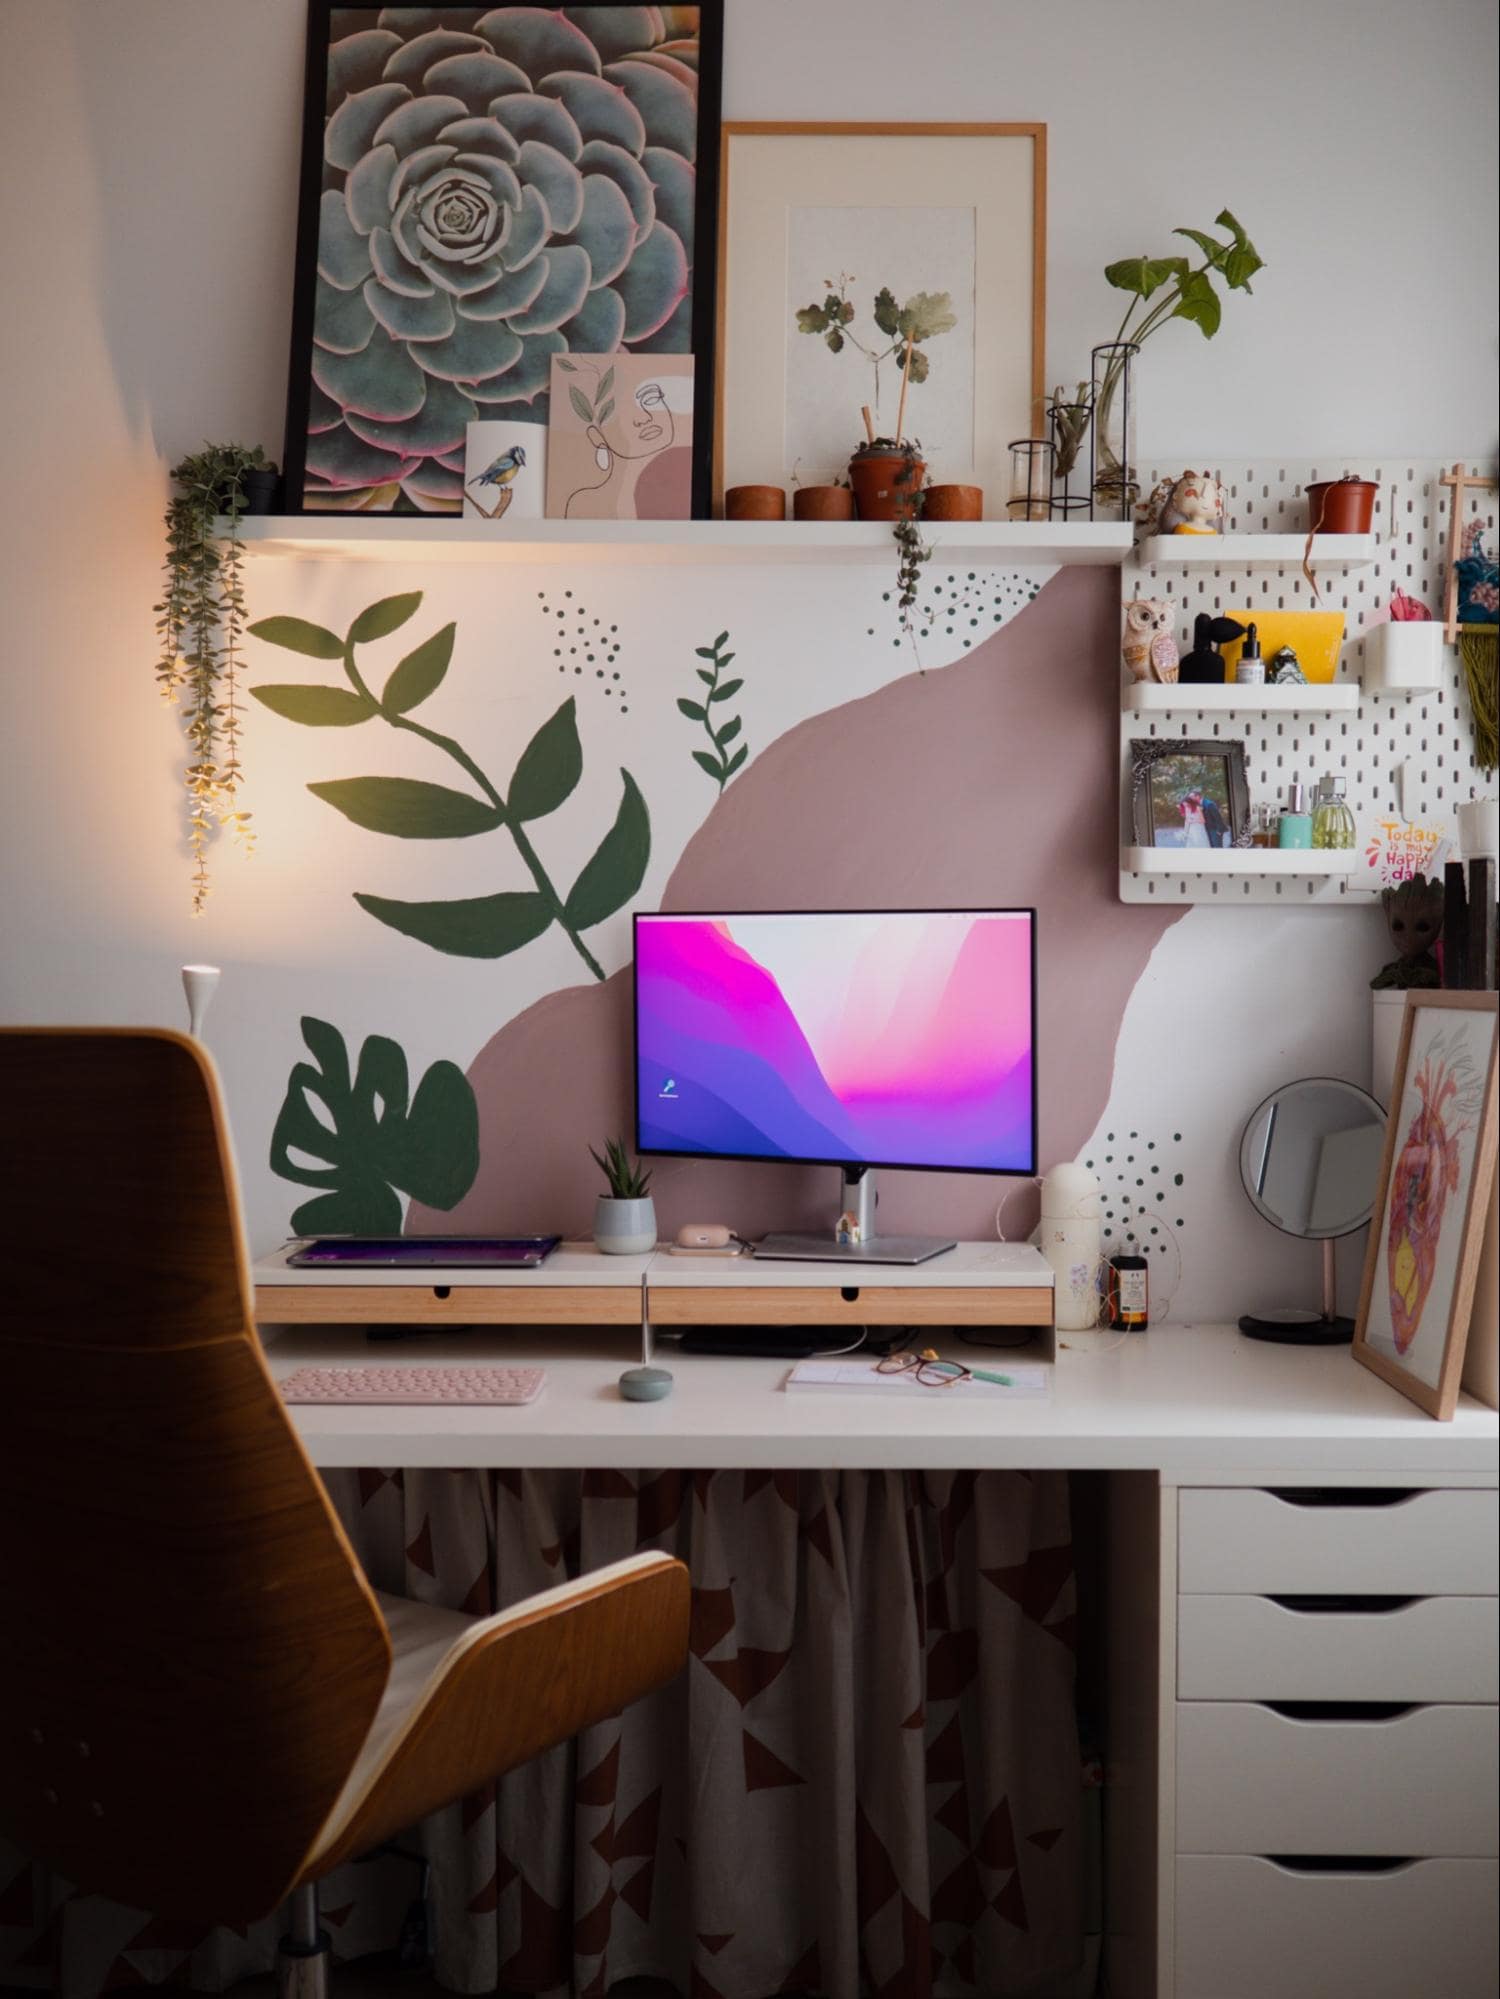 A colourful home office in Romania decorated with plants and nature-themed art, including a handmade floral motif design on the wall